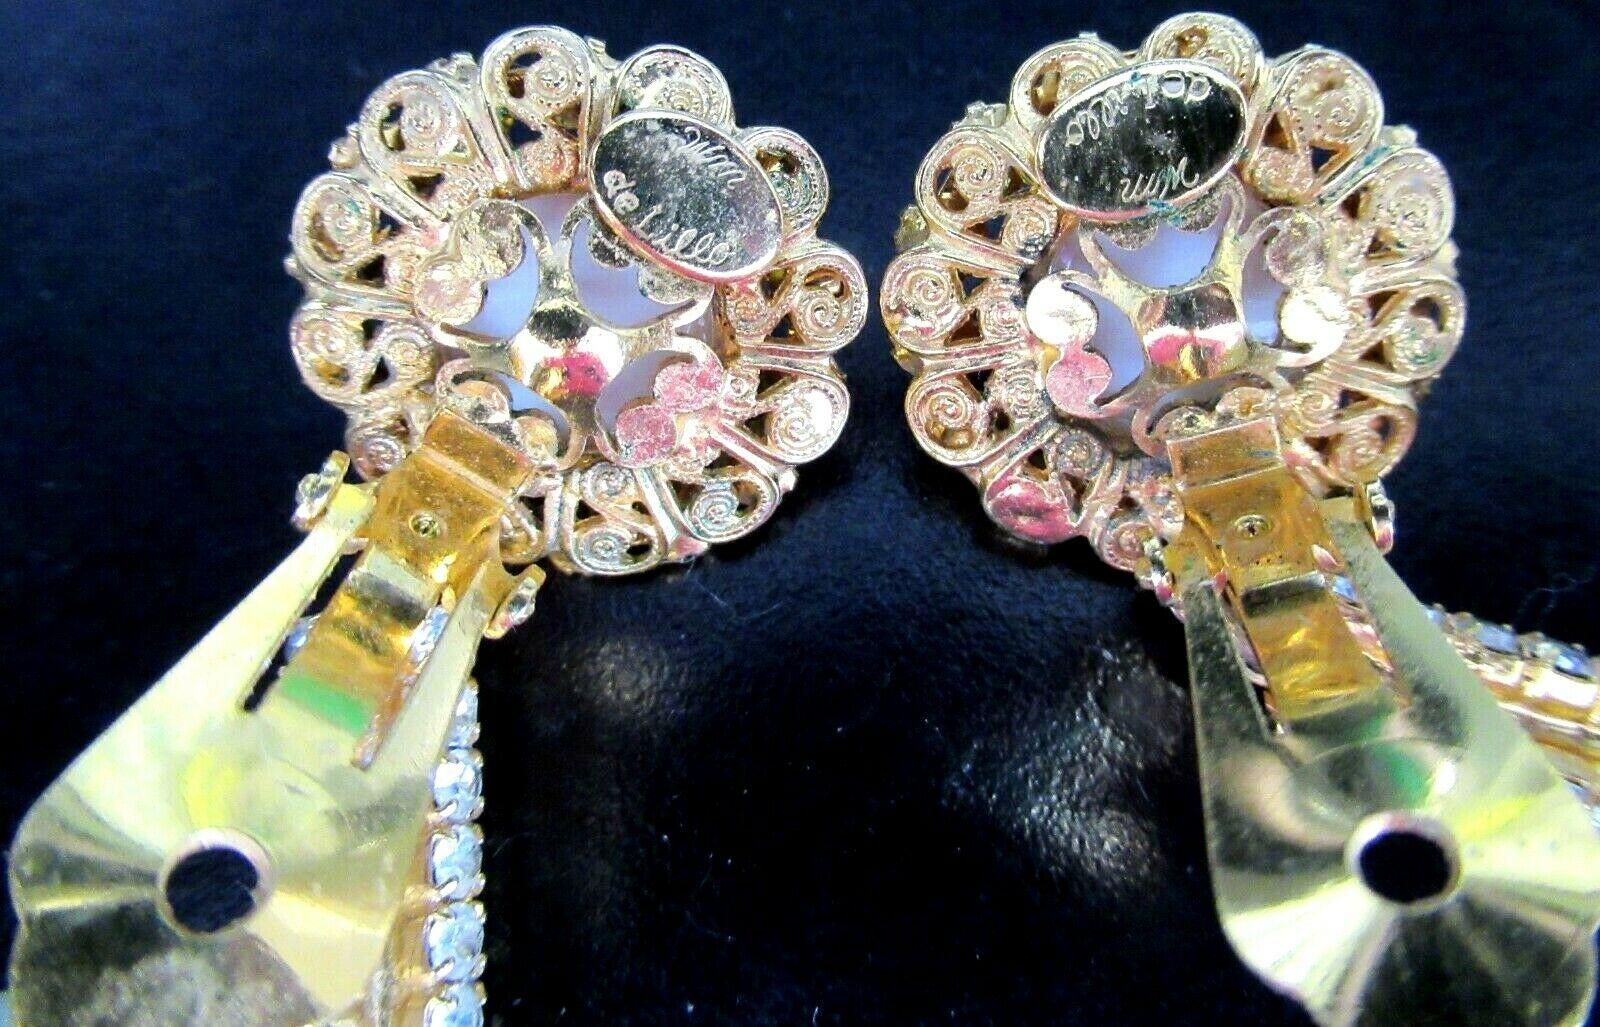 Simply Beautiful Vintage Designer William Delillo Signed White Bead Drop Earrings. Hand set Sparkling Ice Crystals and white Beads. Gold tone mounting.  Measuring approx. 2.75